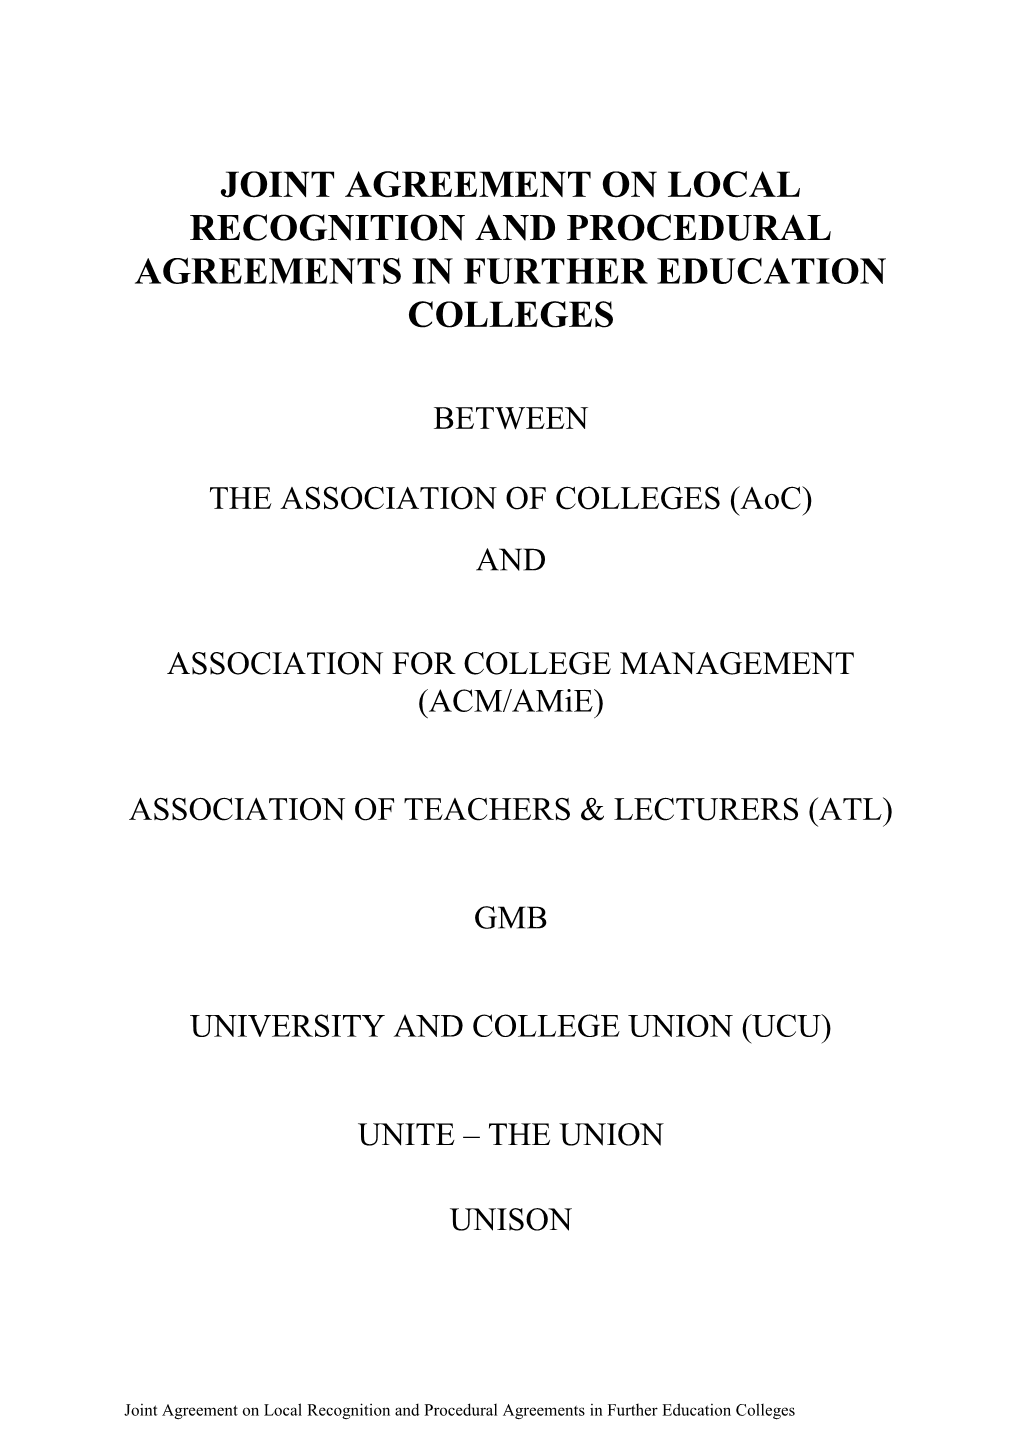 Joint Agreement on Local Recognition and Procedural Agreements in Further Education Colleges